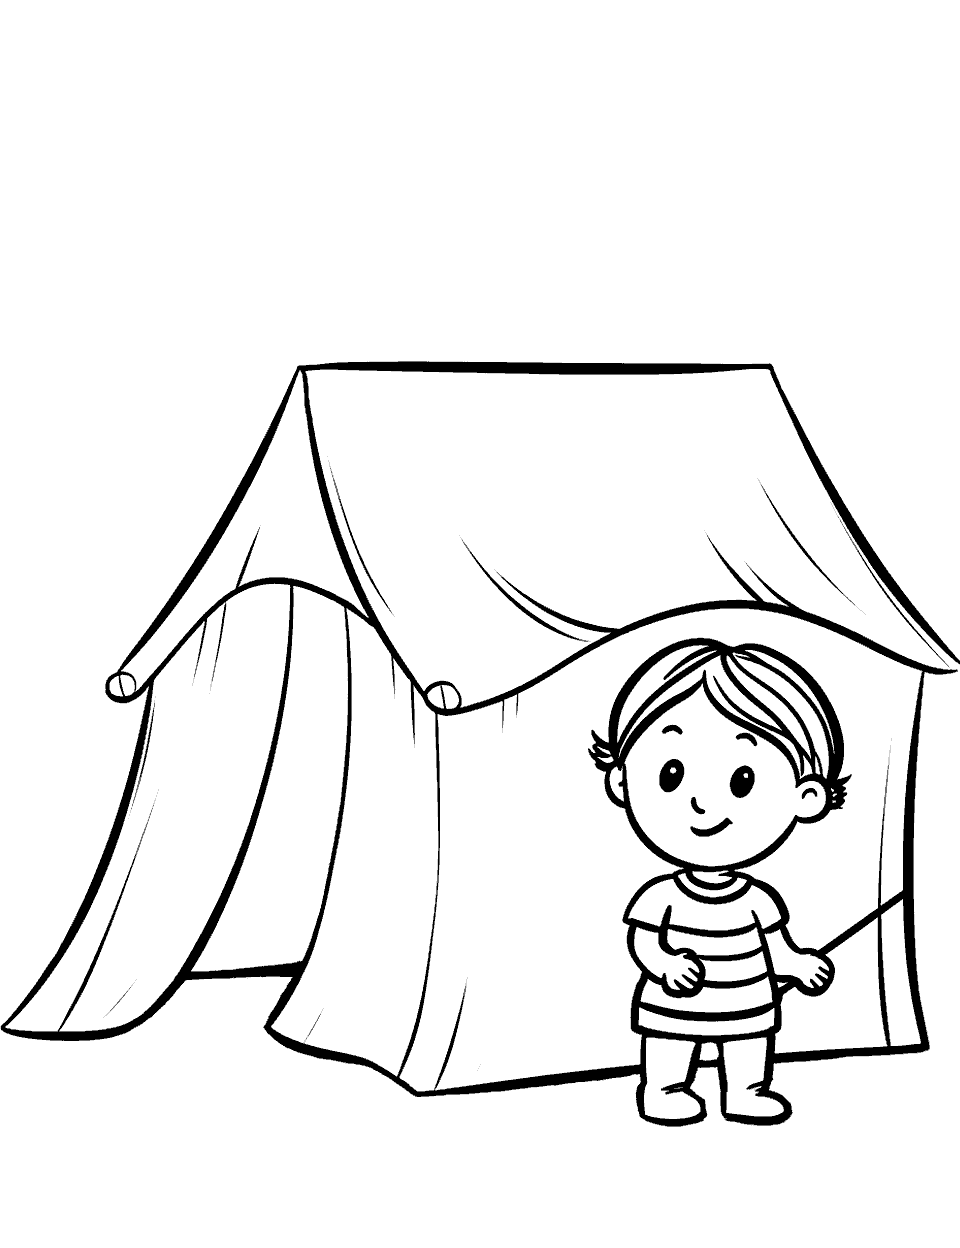 Going Camping Coloring Page - A kid with his tent raised up, ready for camping.